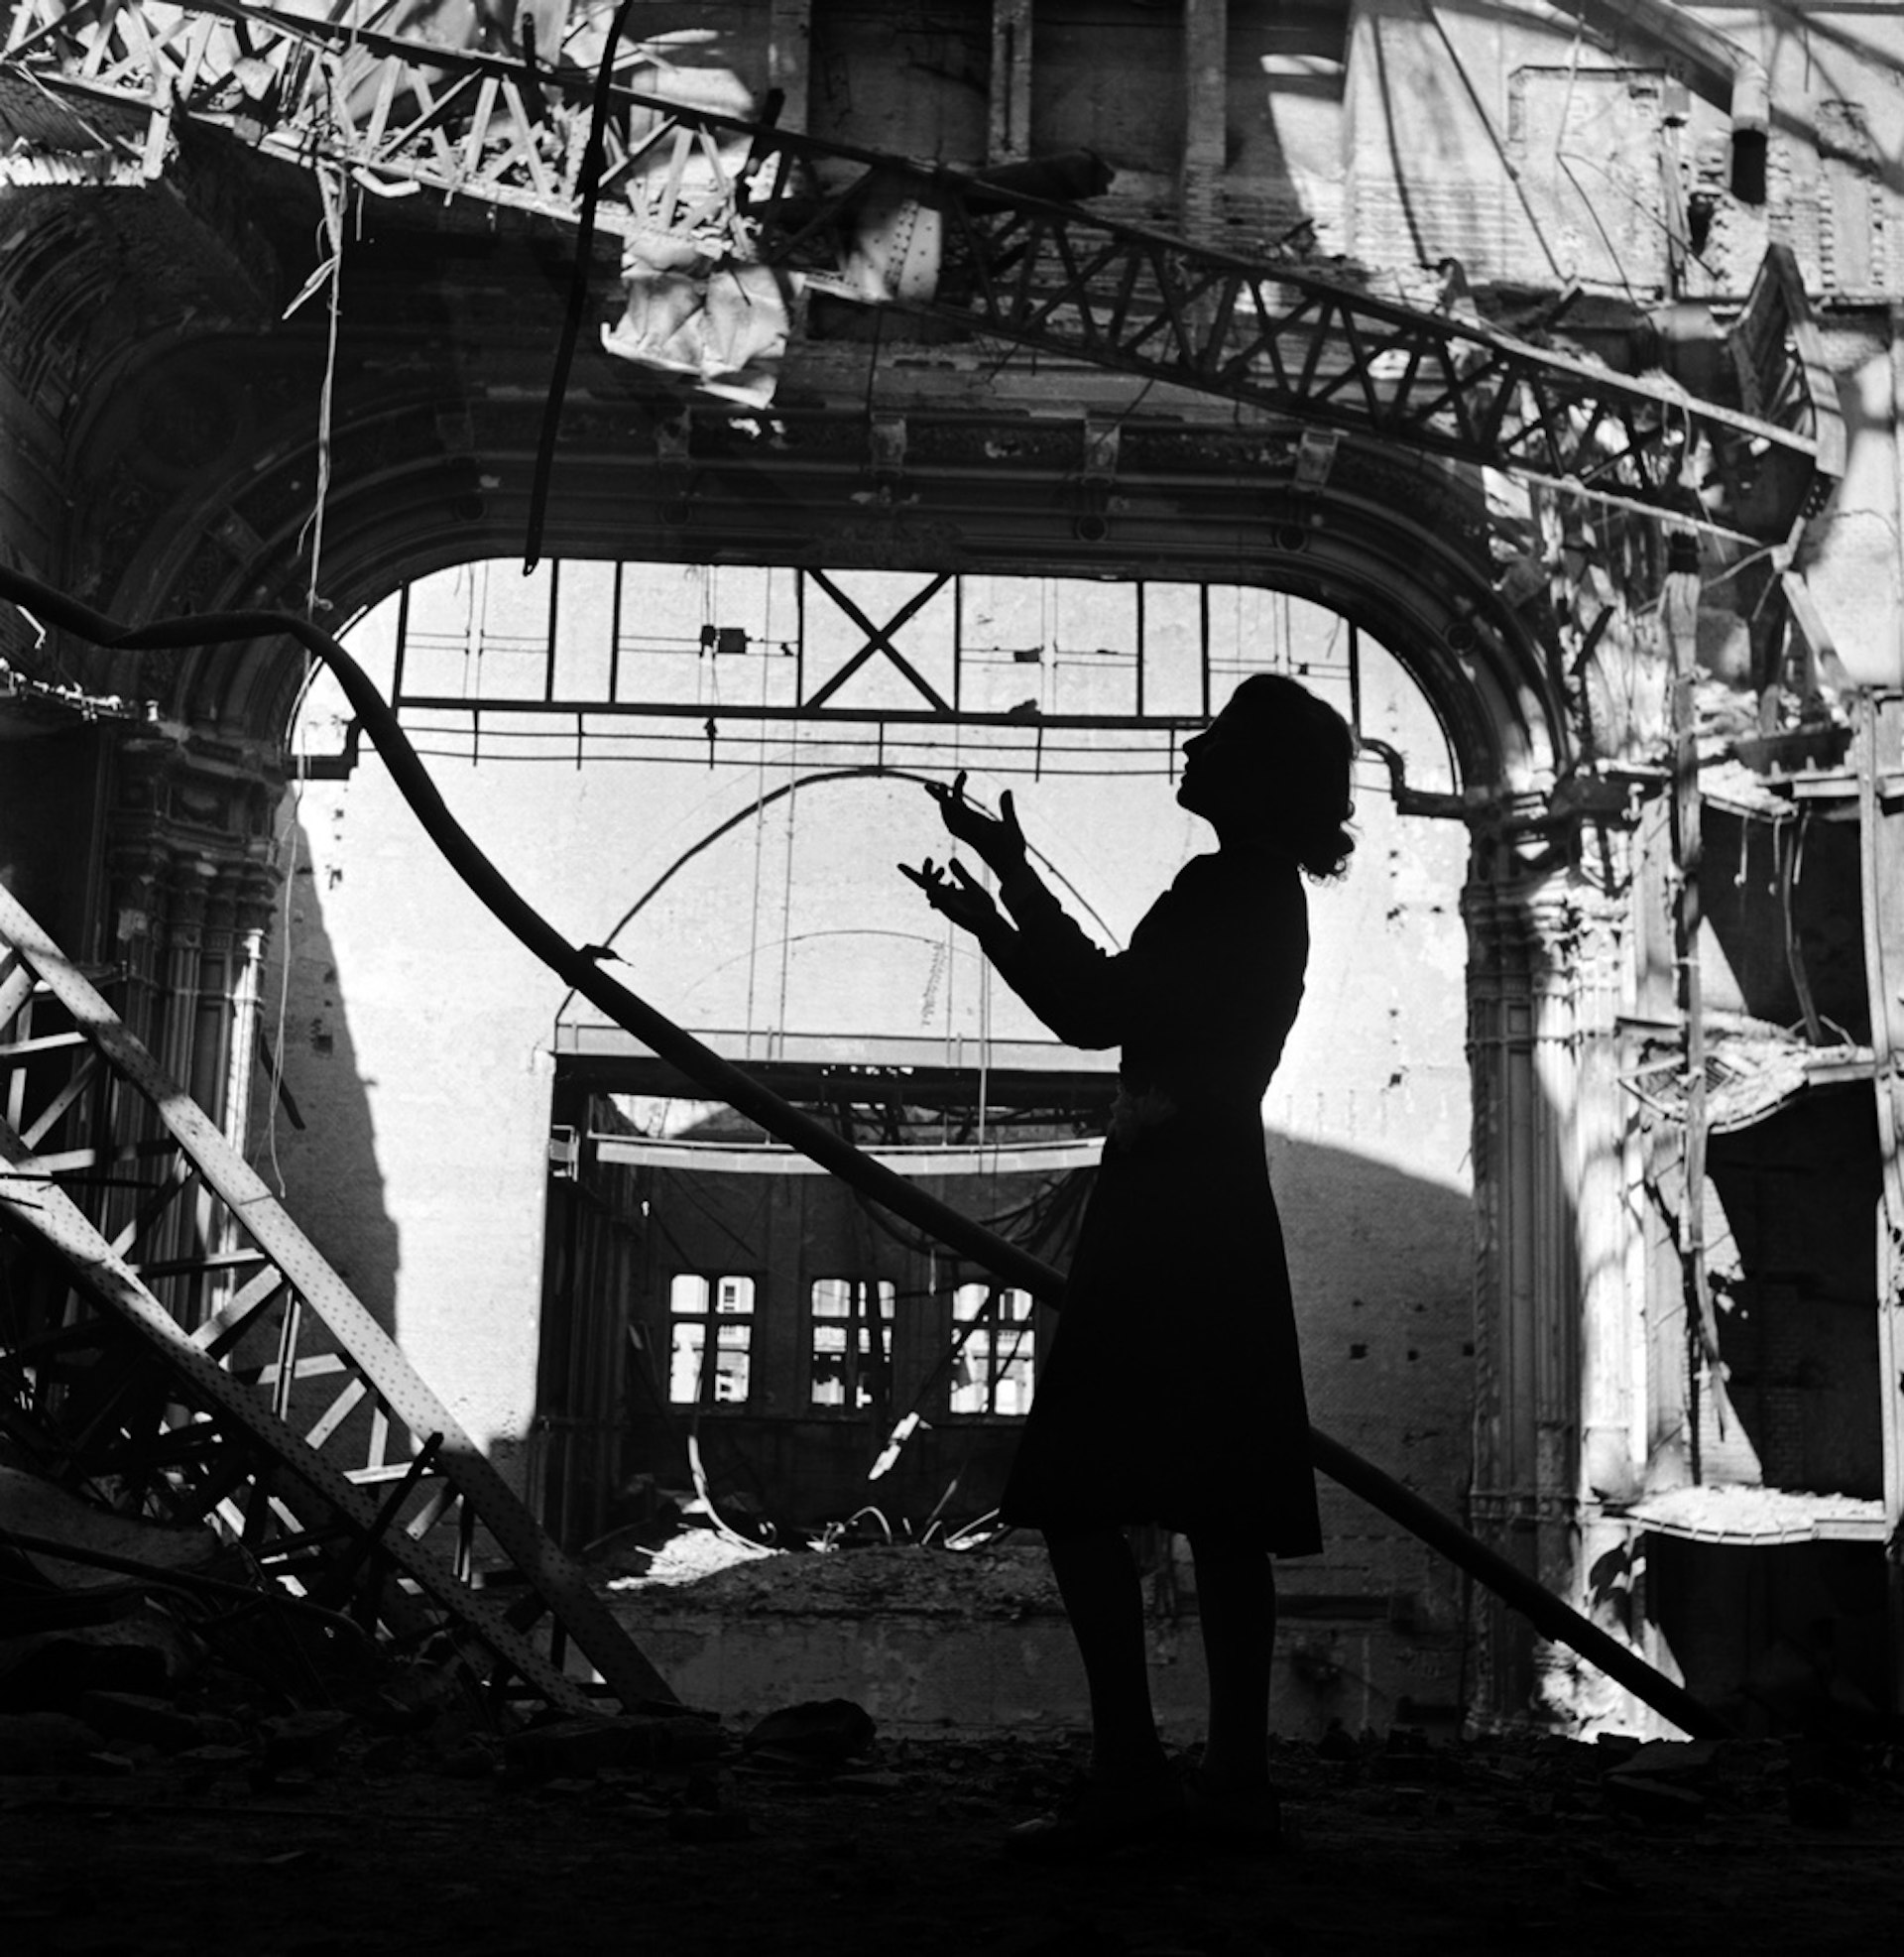 How Lee Miller revolutionized the role of women in photography